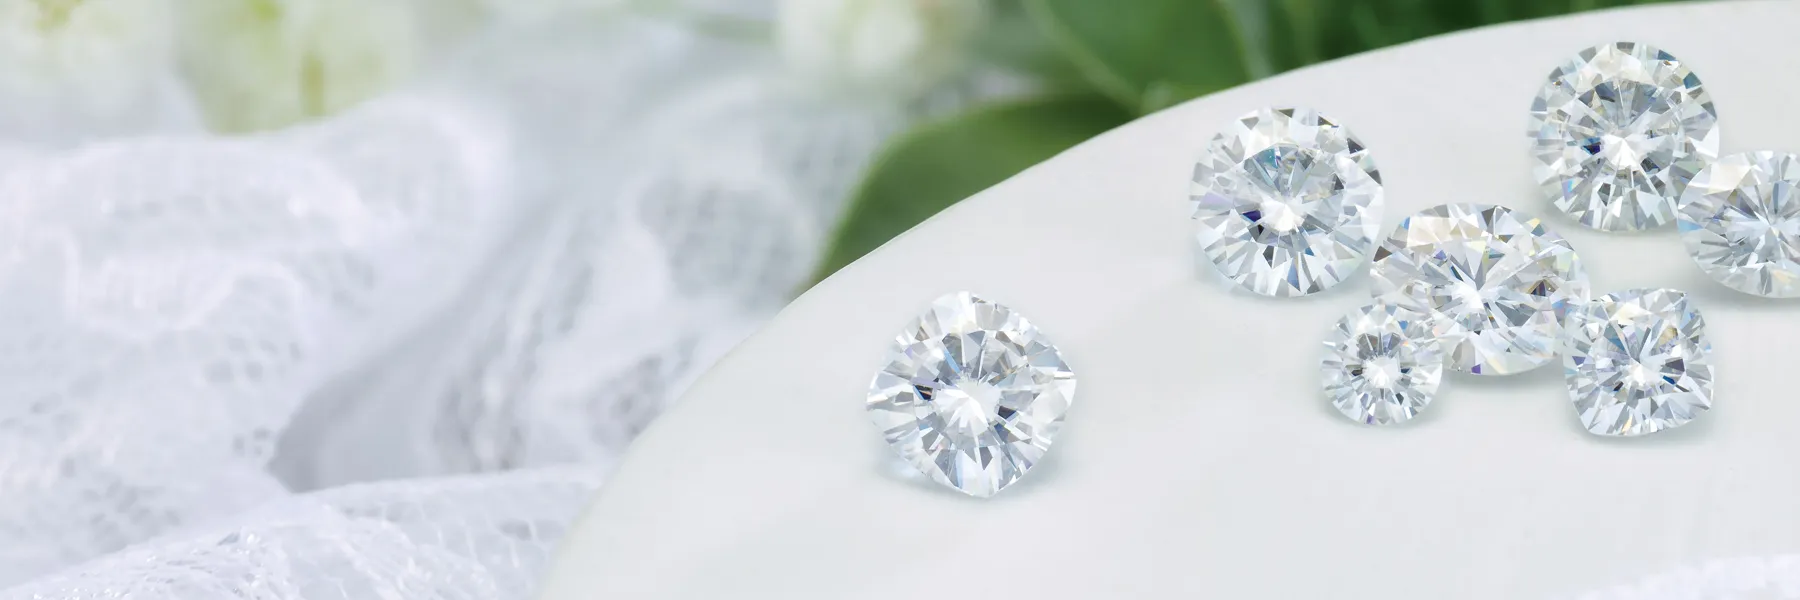 Your Trusted Jeweler Since 1802Leading Diamond Experts  Lennons W.B. Wilcox Jewelers New Hartford, NY